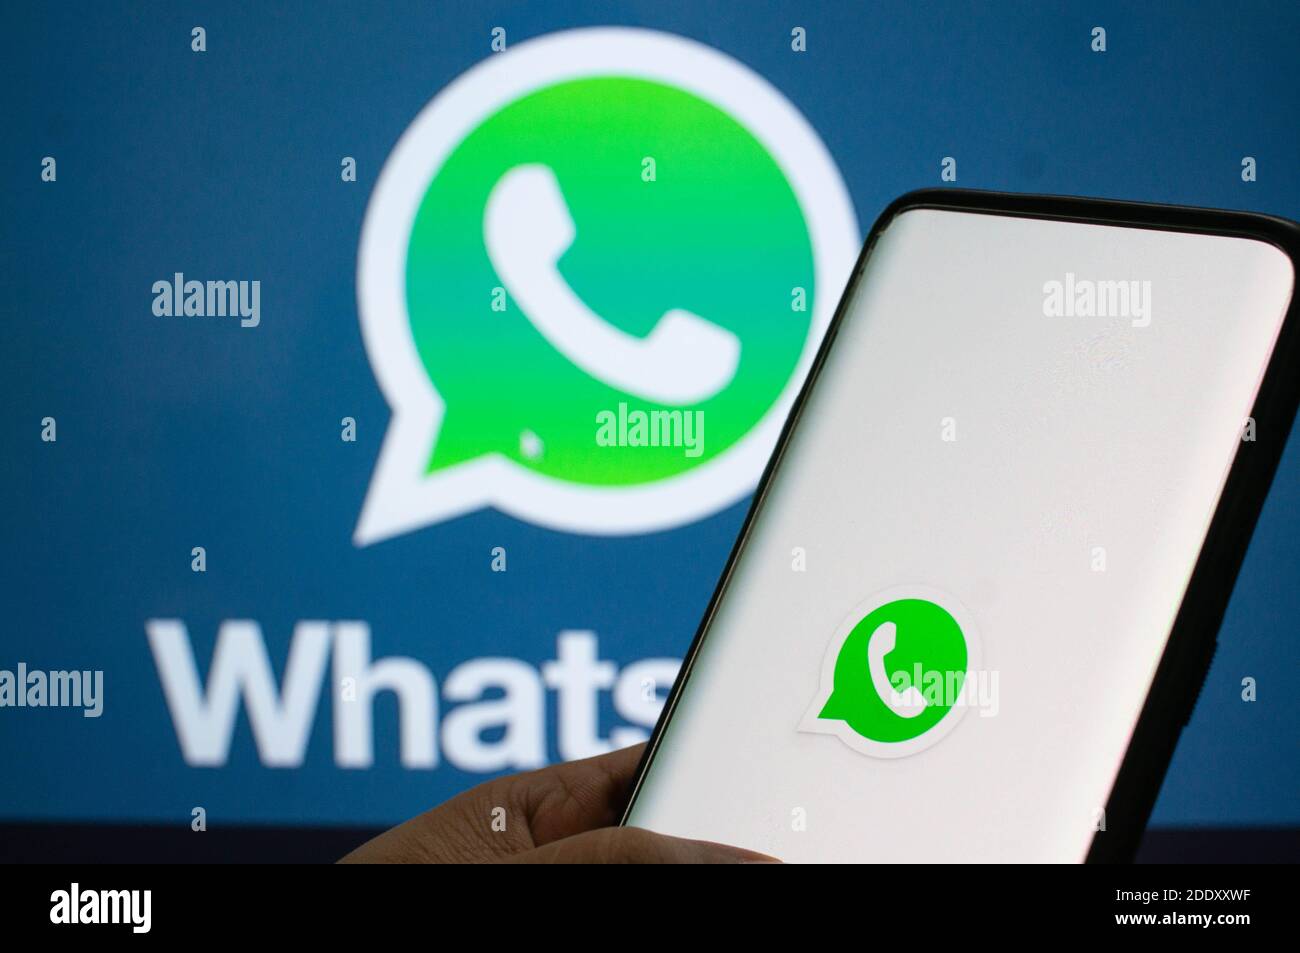 Jaipur, India, Circa 2020 - A mobile logged into the whatsapp mobile application infront of the white light board with whatsapp logo on it. The backgr Stock Photo